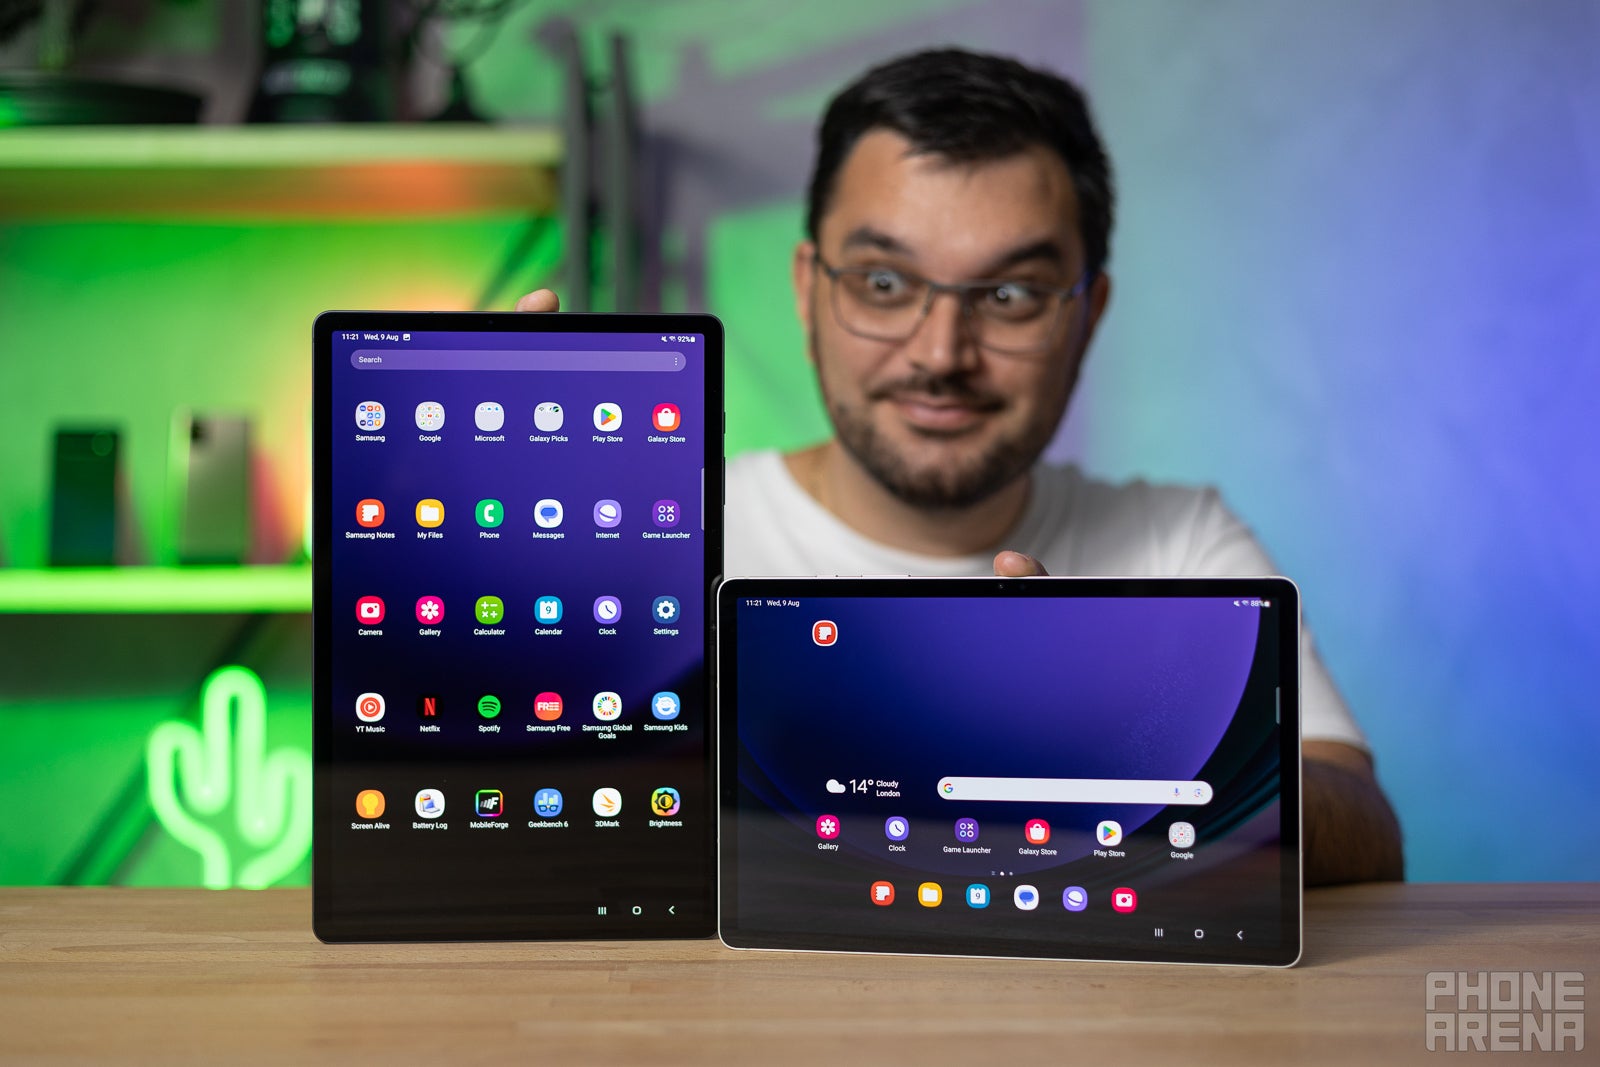 Samsung Galaxy Tab S9 Plus Review  Best Android Tablet ever 